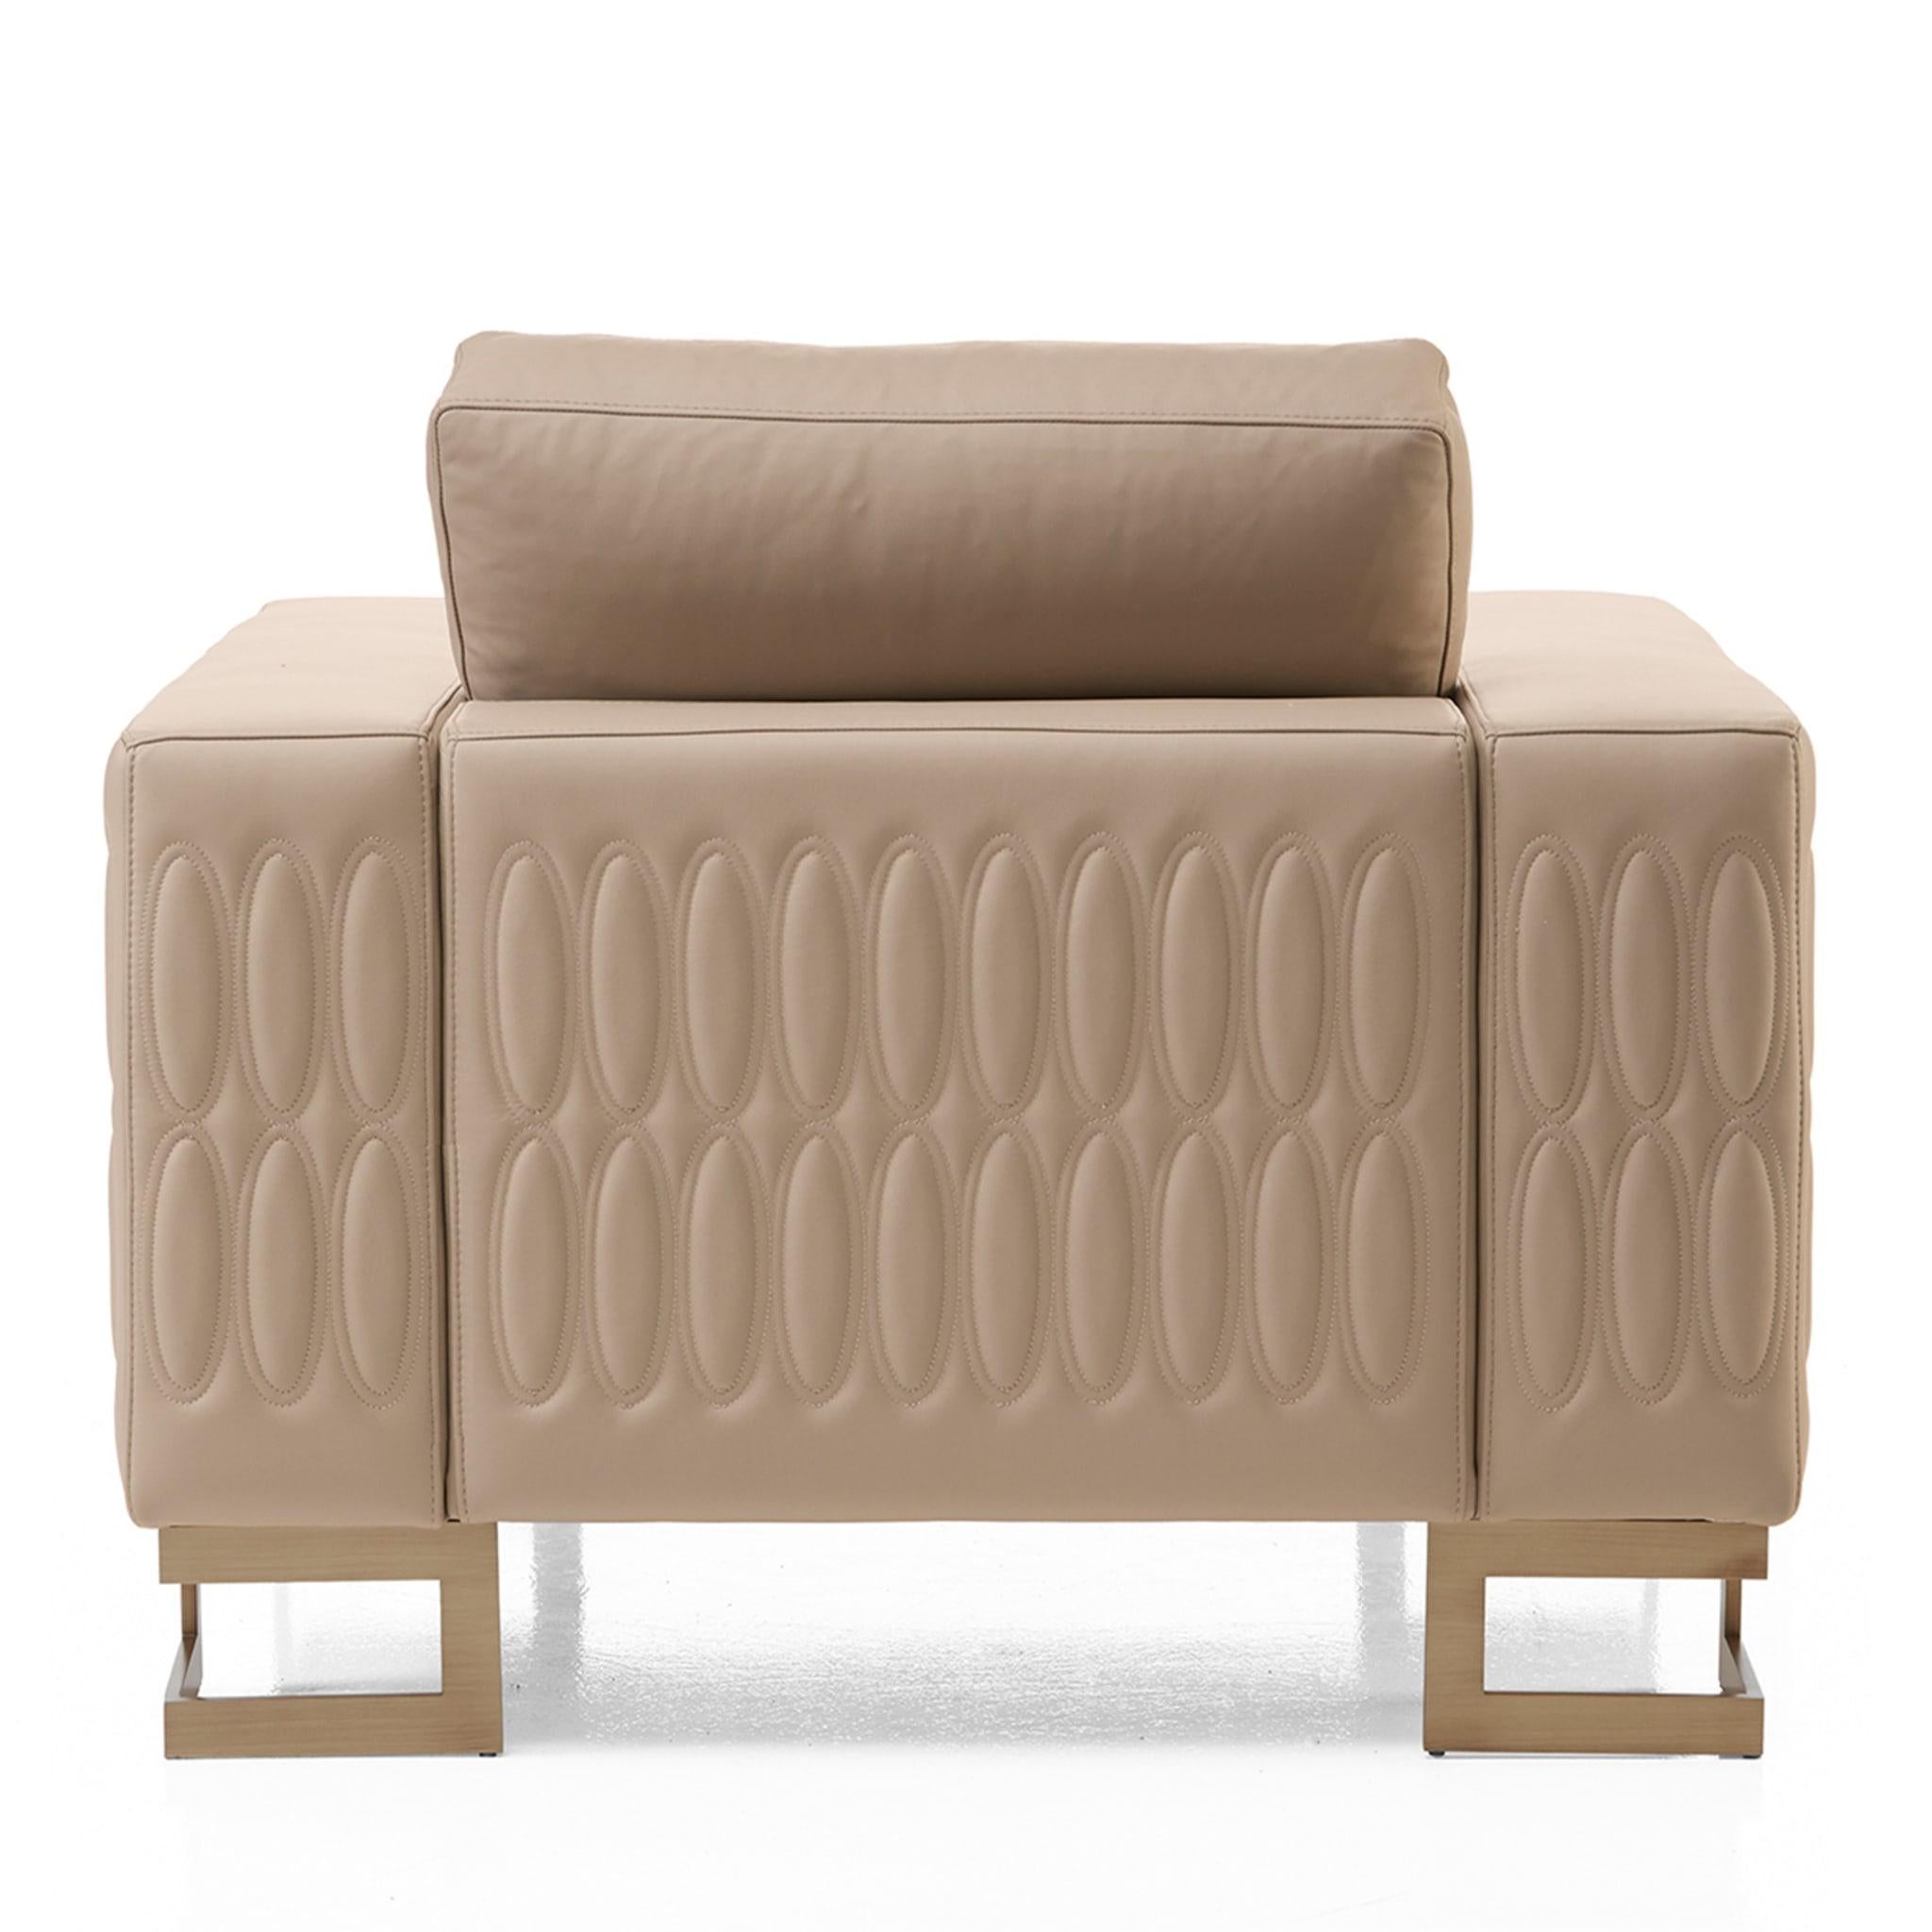 Assorted geometric inspirations harmoniously coexist in this sophisticated armchair luxuriously covered in fine beige leather. A repetitive quilted pattern of ovals adorns the sides and the coordinated cushion, a choice further underscoring the